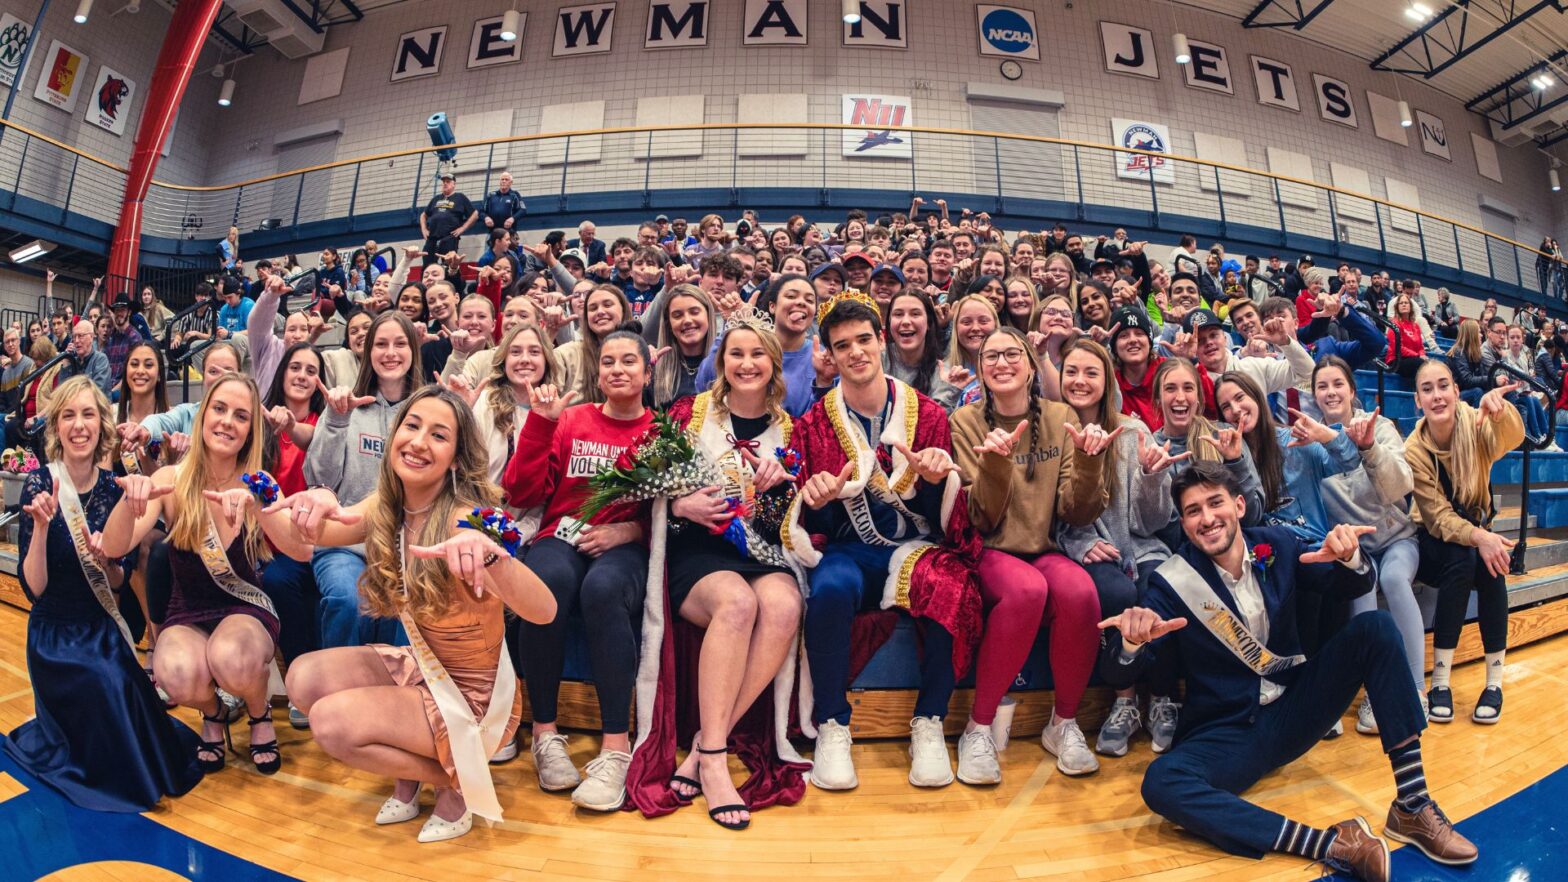 The student body gathers in the stands to celebrate Newman University homecoming night with the newly crowned king and queen.